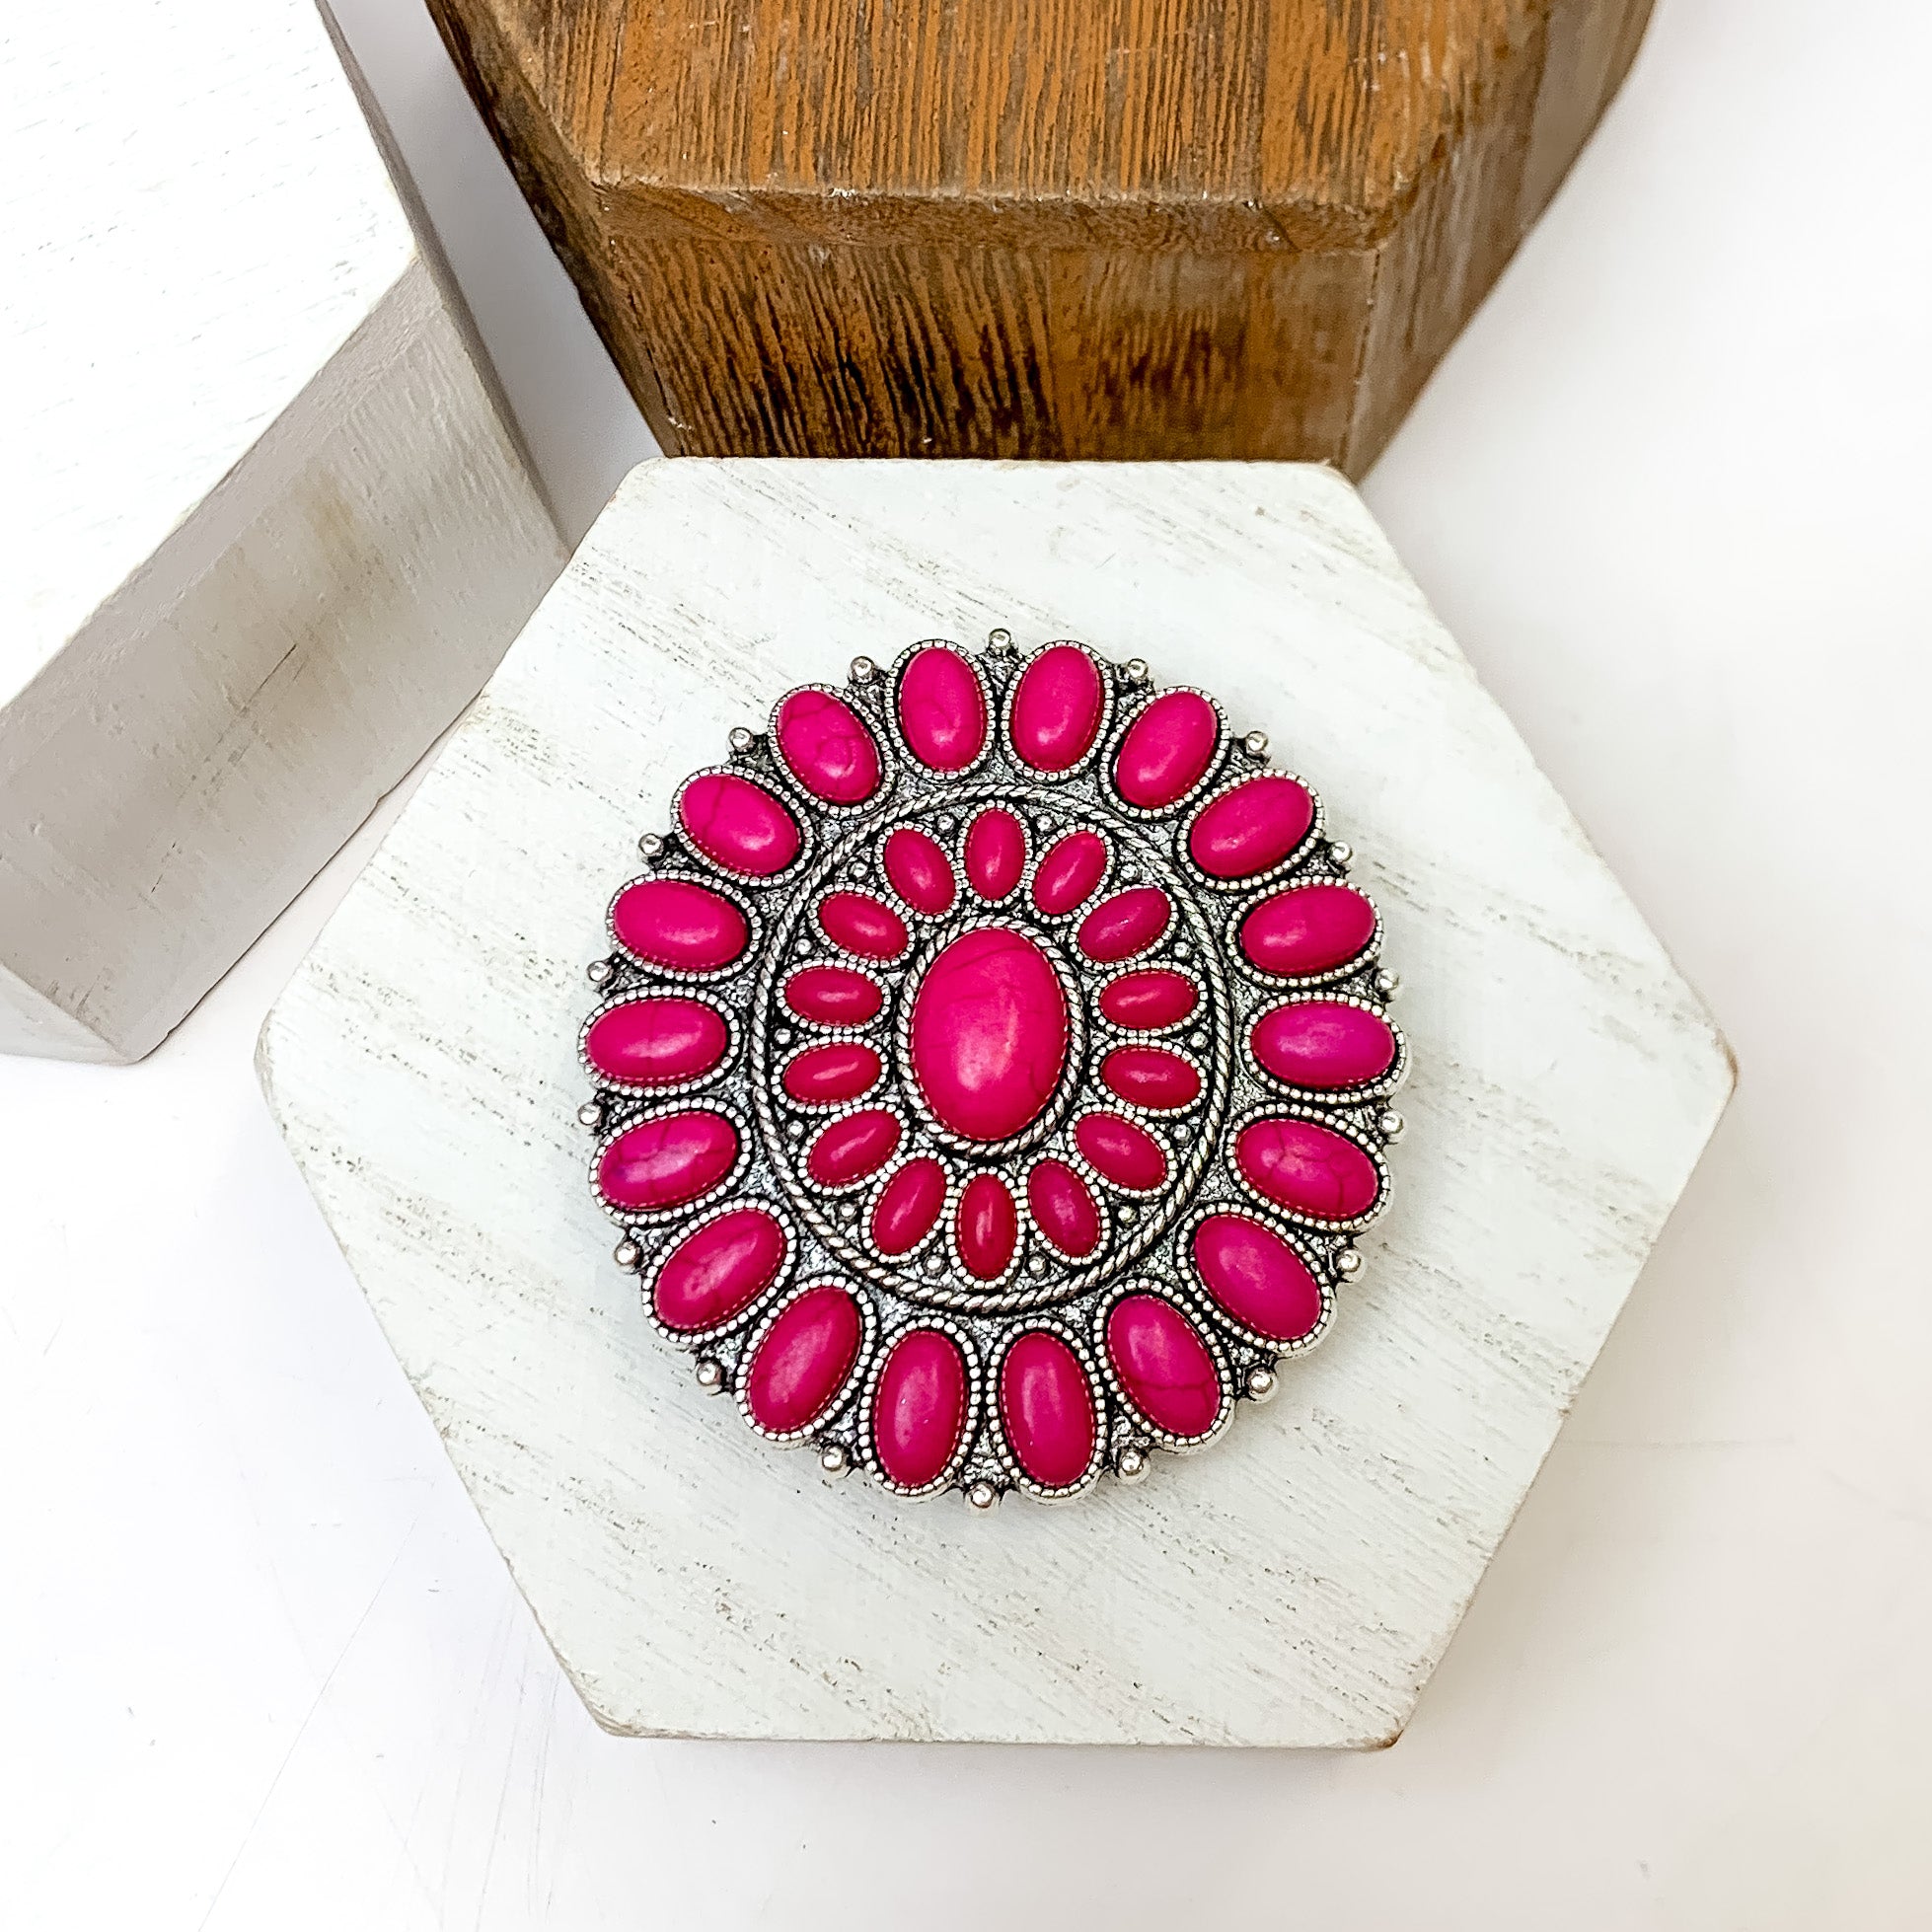 Silver Tone With Fuchsia Stones Circle Phone Grip. This phone grip is pictured on a white block with a white background behind it.